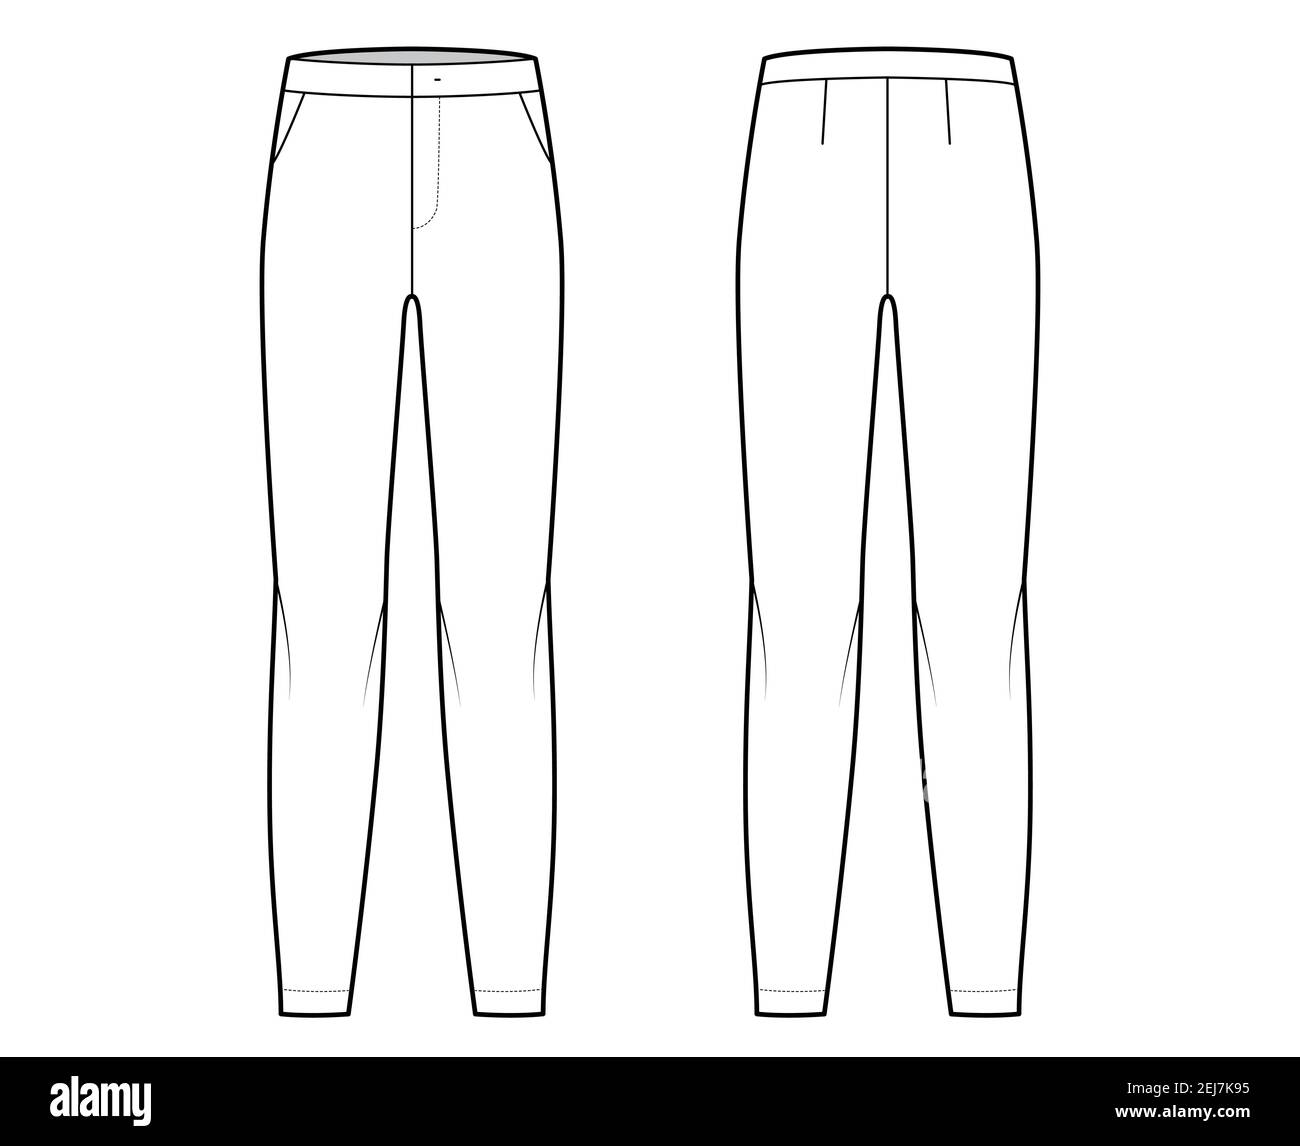 fashion style of pants for women drawing design  Fashion drawing Designs  to draw Clothing design sketches